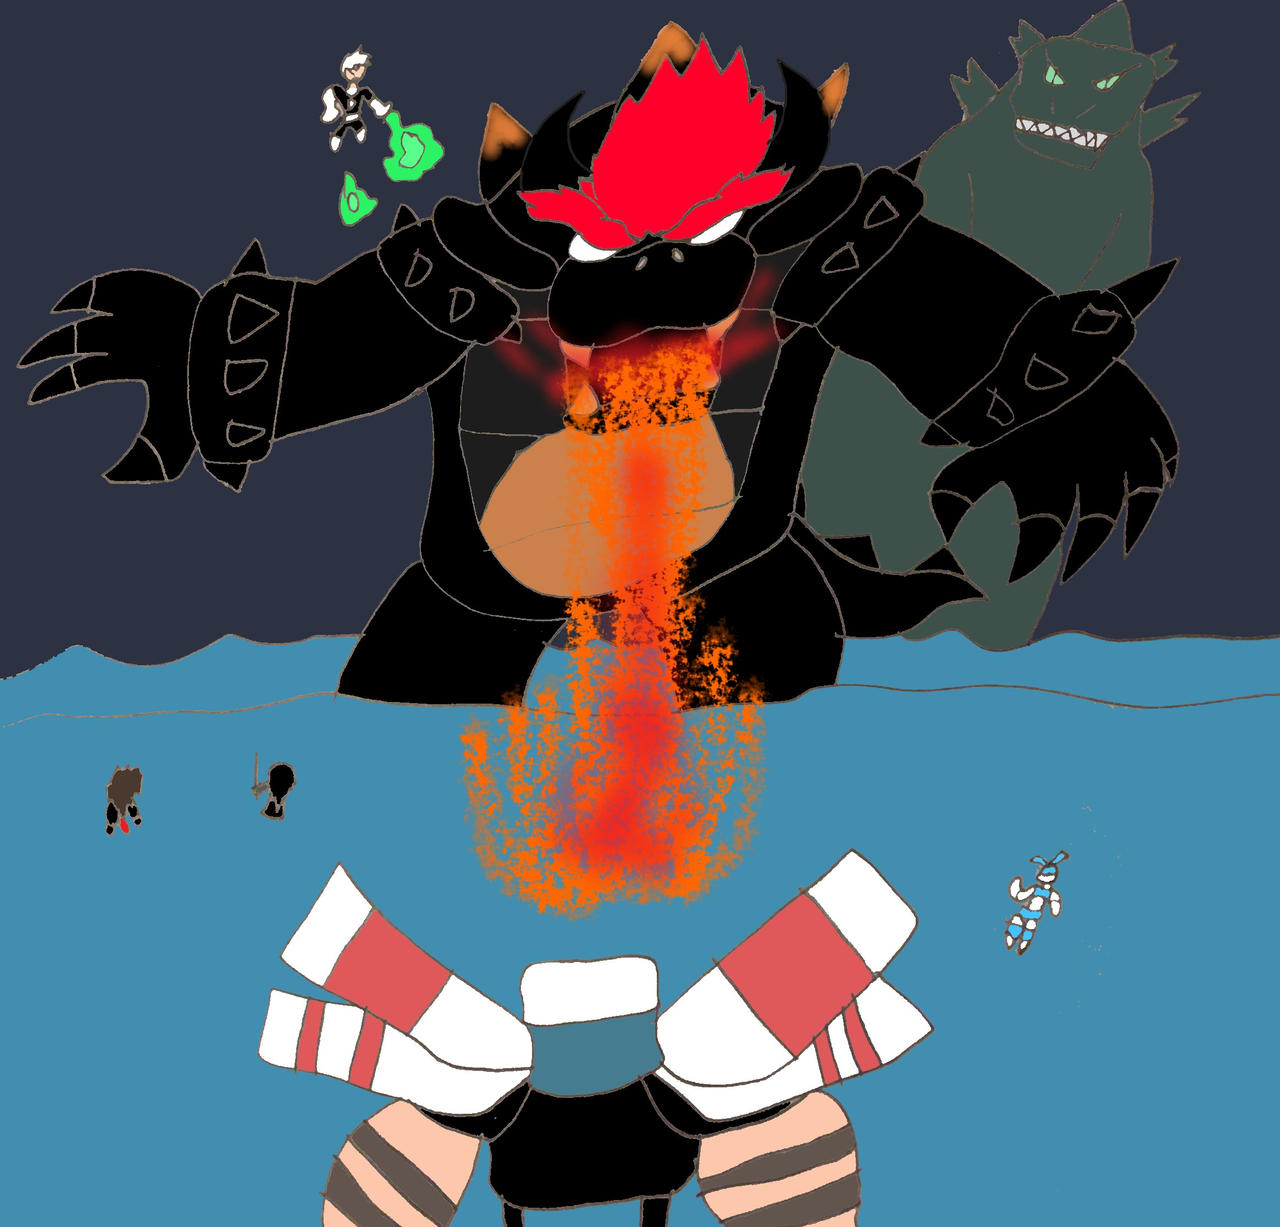 Super Mario 3D Carowinds Bowser's Fury 325 Poster by 4-LeggyKaiArt5656 on  DeviantArt